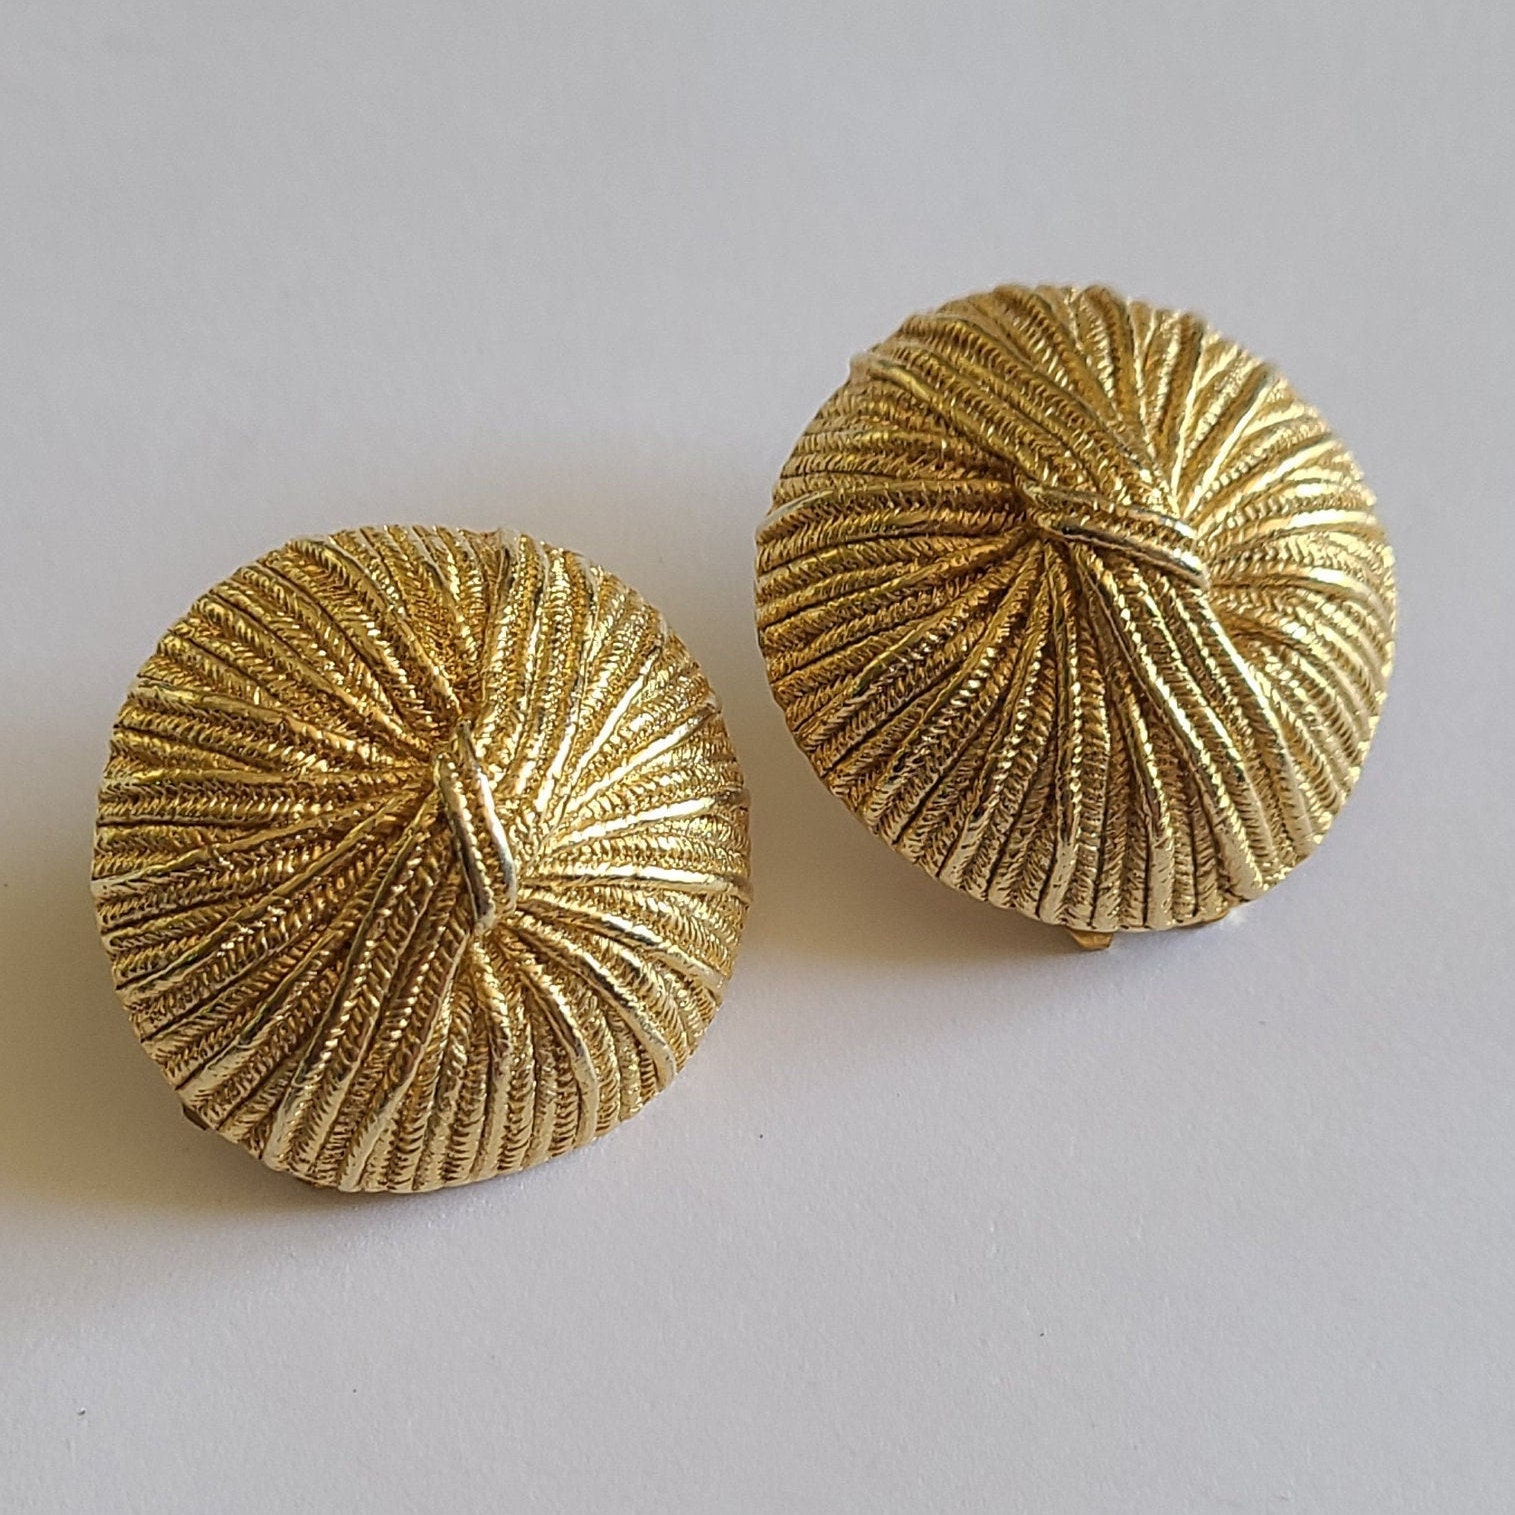 Exquisite Vintage Paolo Gucci Clip-on Earrings Gold-tone | Etsy